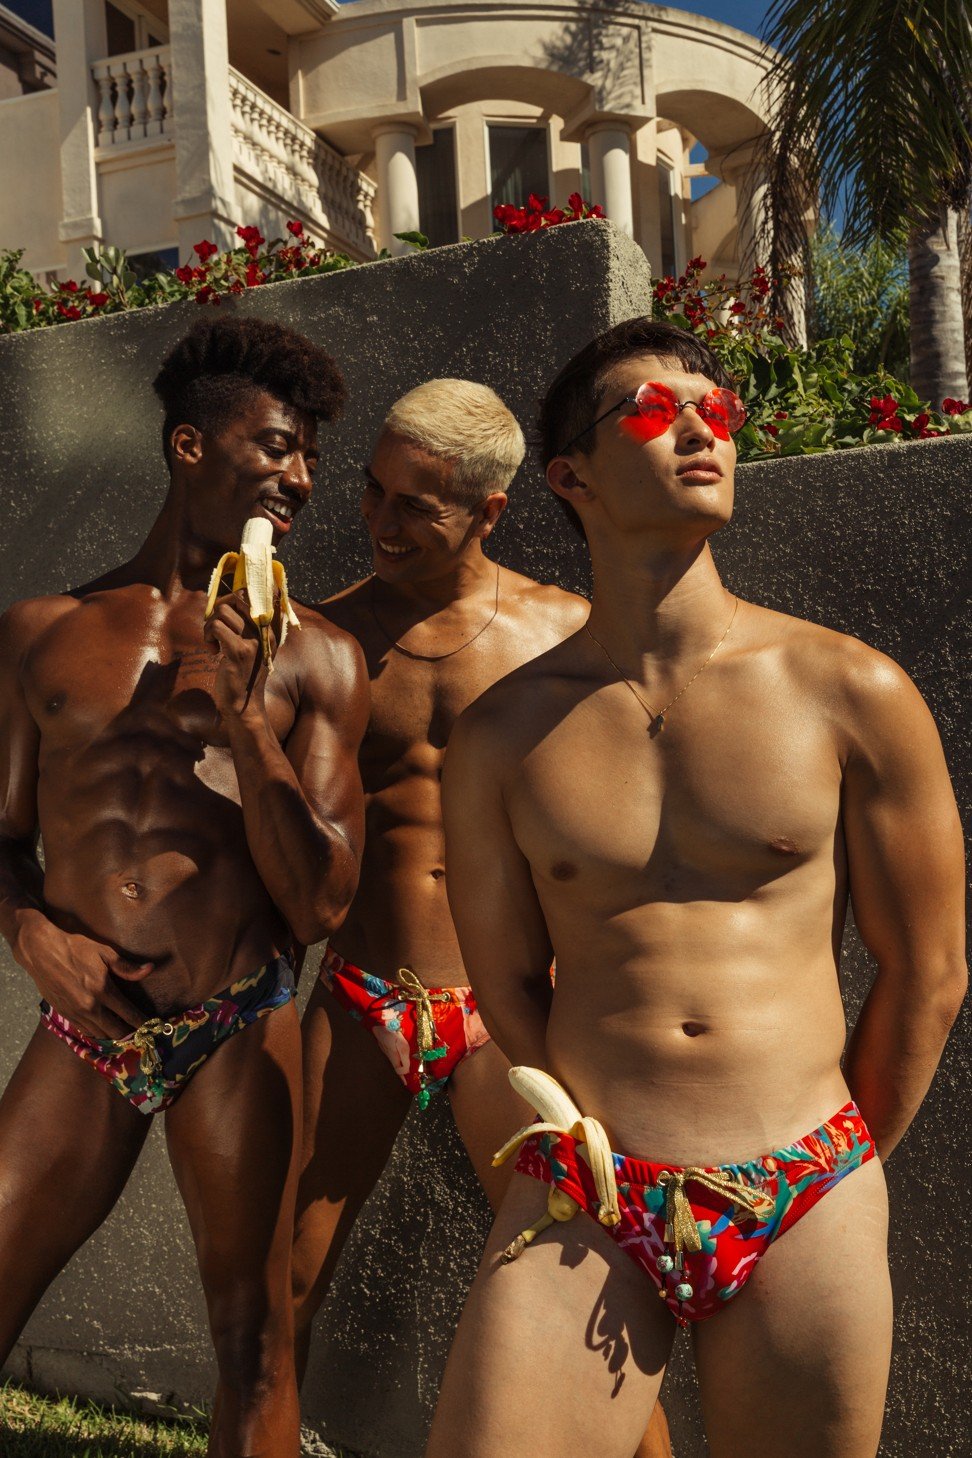 Swimwear and underwear targeting gay men gets boost in Asia as newcomers  enter the niche industry